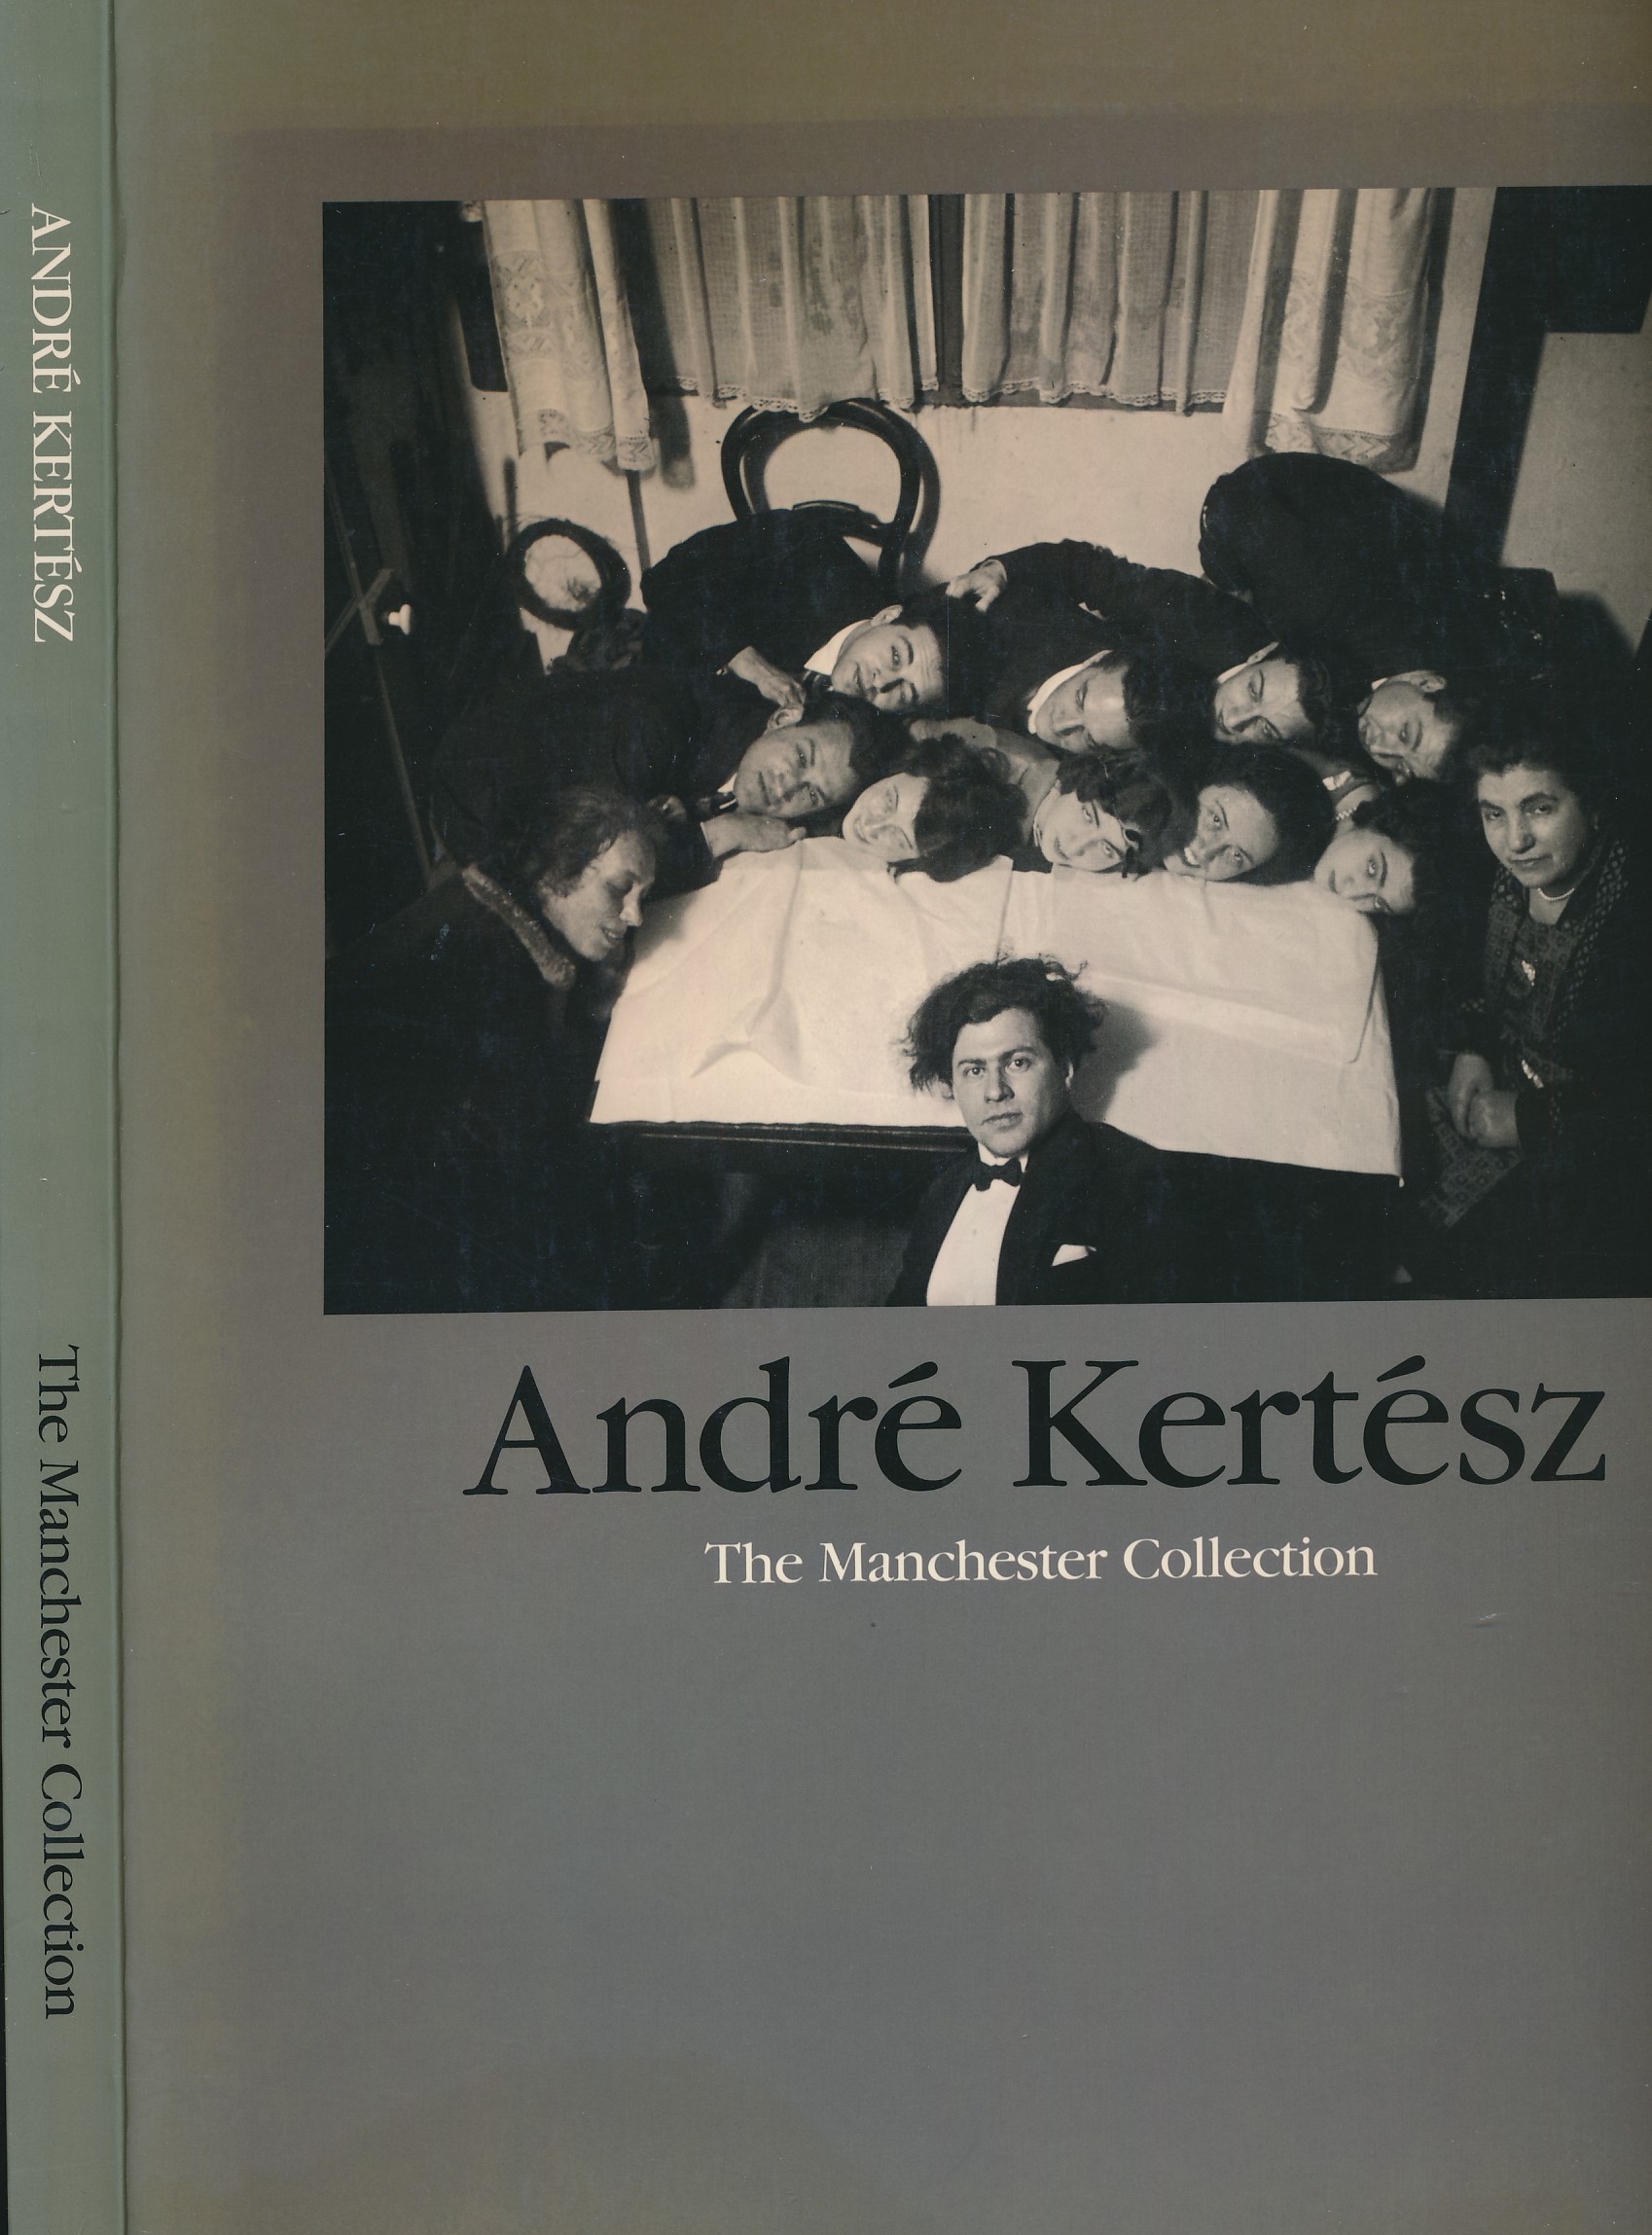 Andr Kertsz. The Manchester Collection